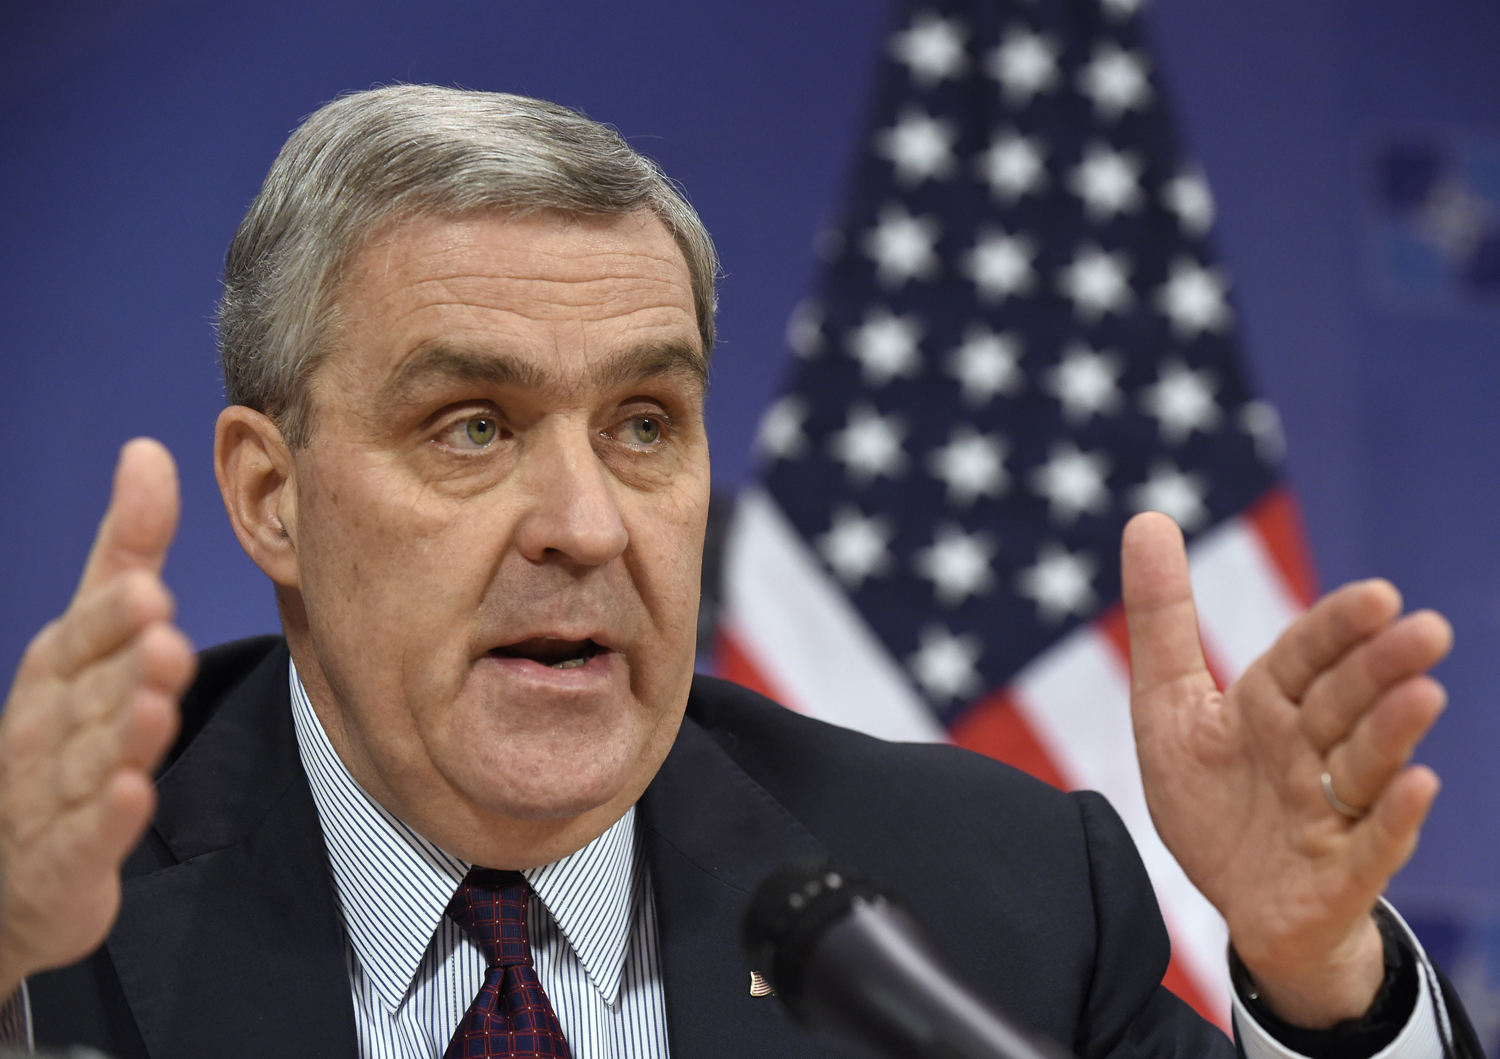 US Ambassador to NATO Douglas Lute gives a press conference on Dec. 1, 2014, at the organization's headquarters in Brussels. (John Thys—AFP/Getty Images)